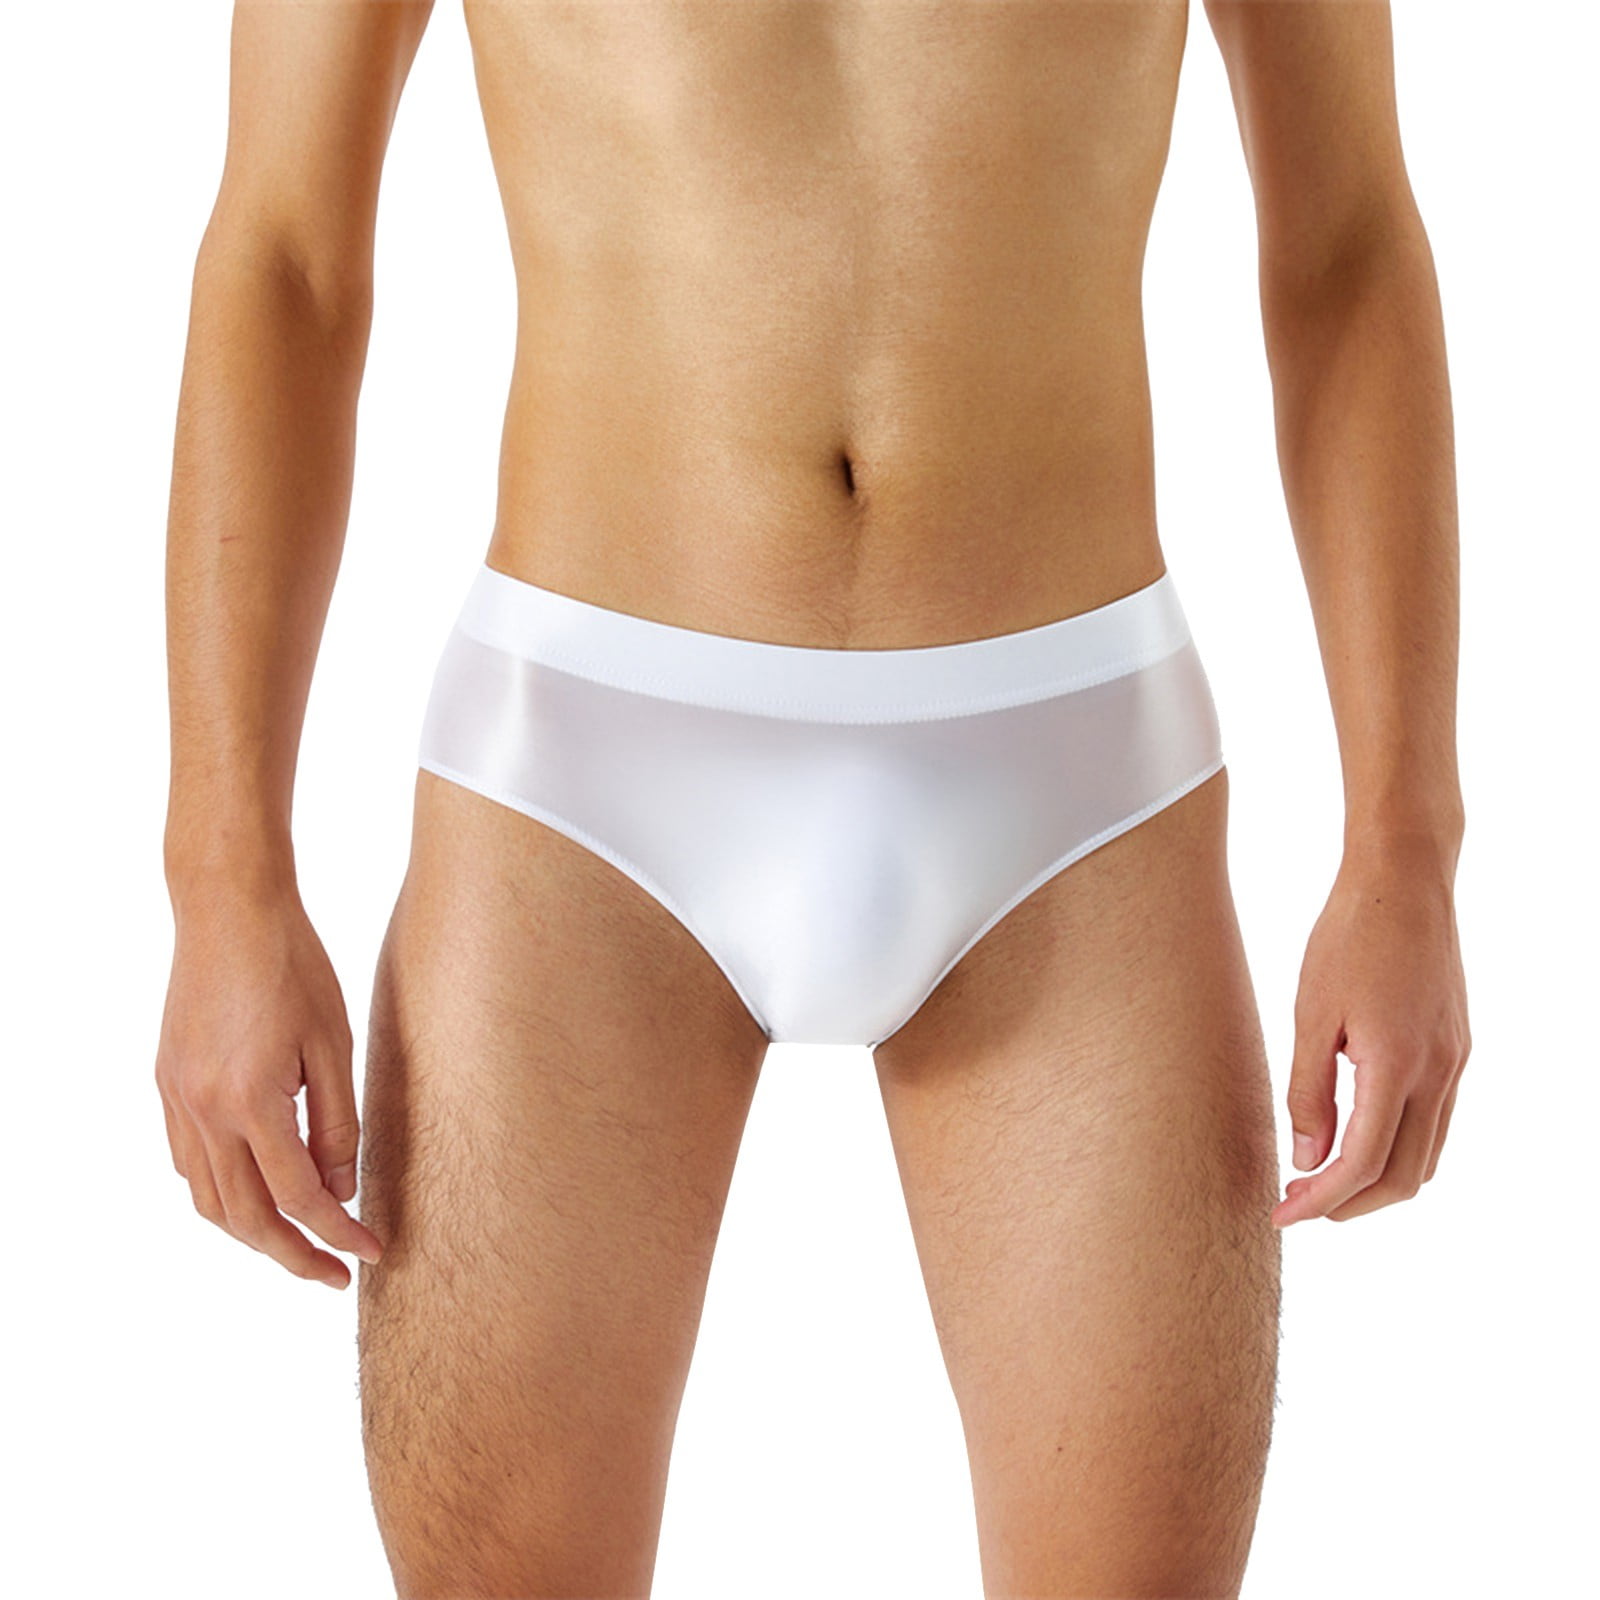 Men'S Underwear Briefs Crotch Seamless Glossy Silky High Elastic Plus Size  Transparent. Pant